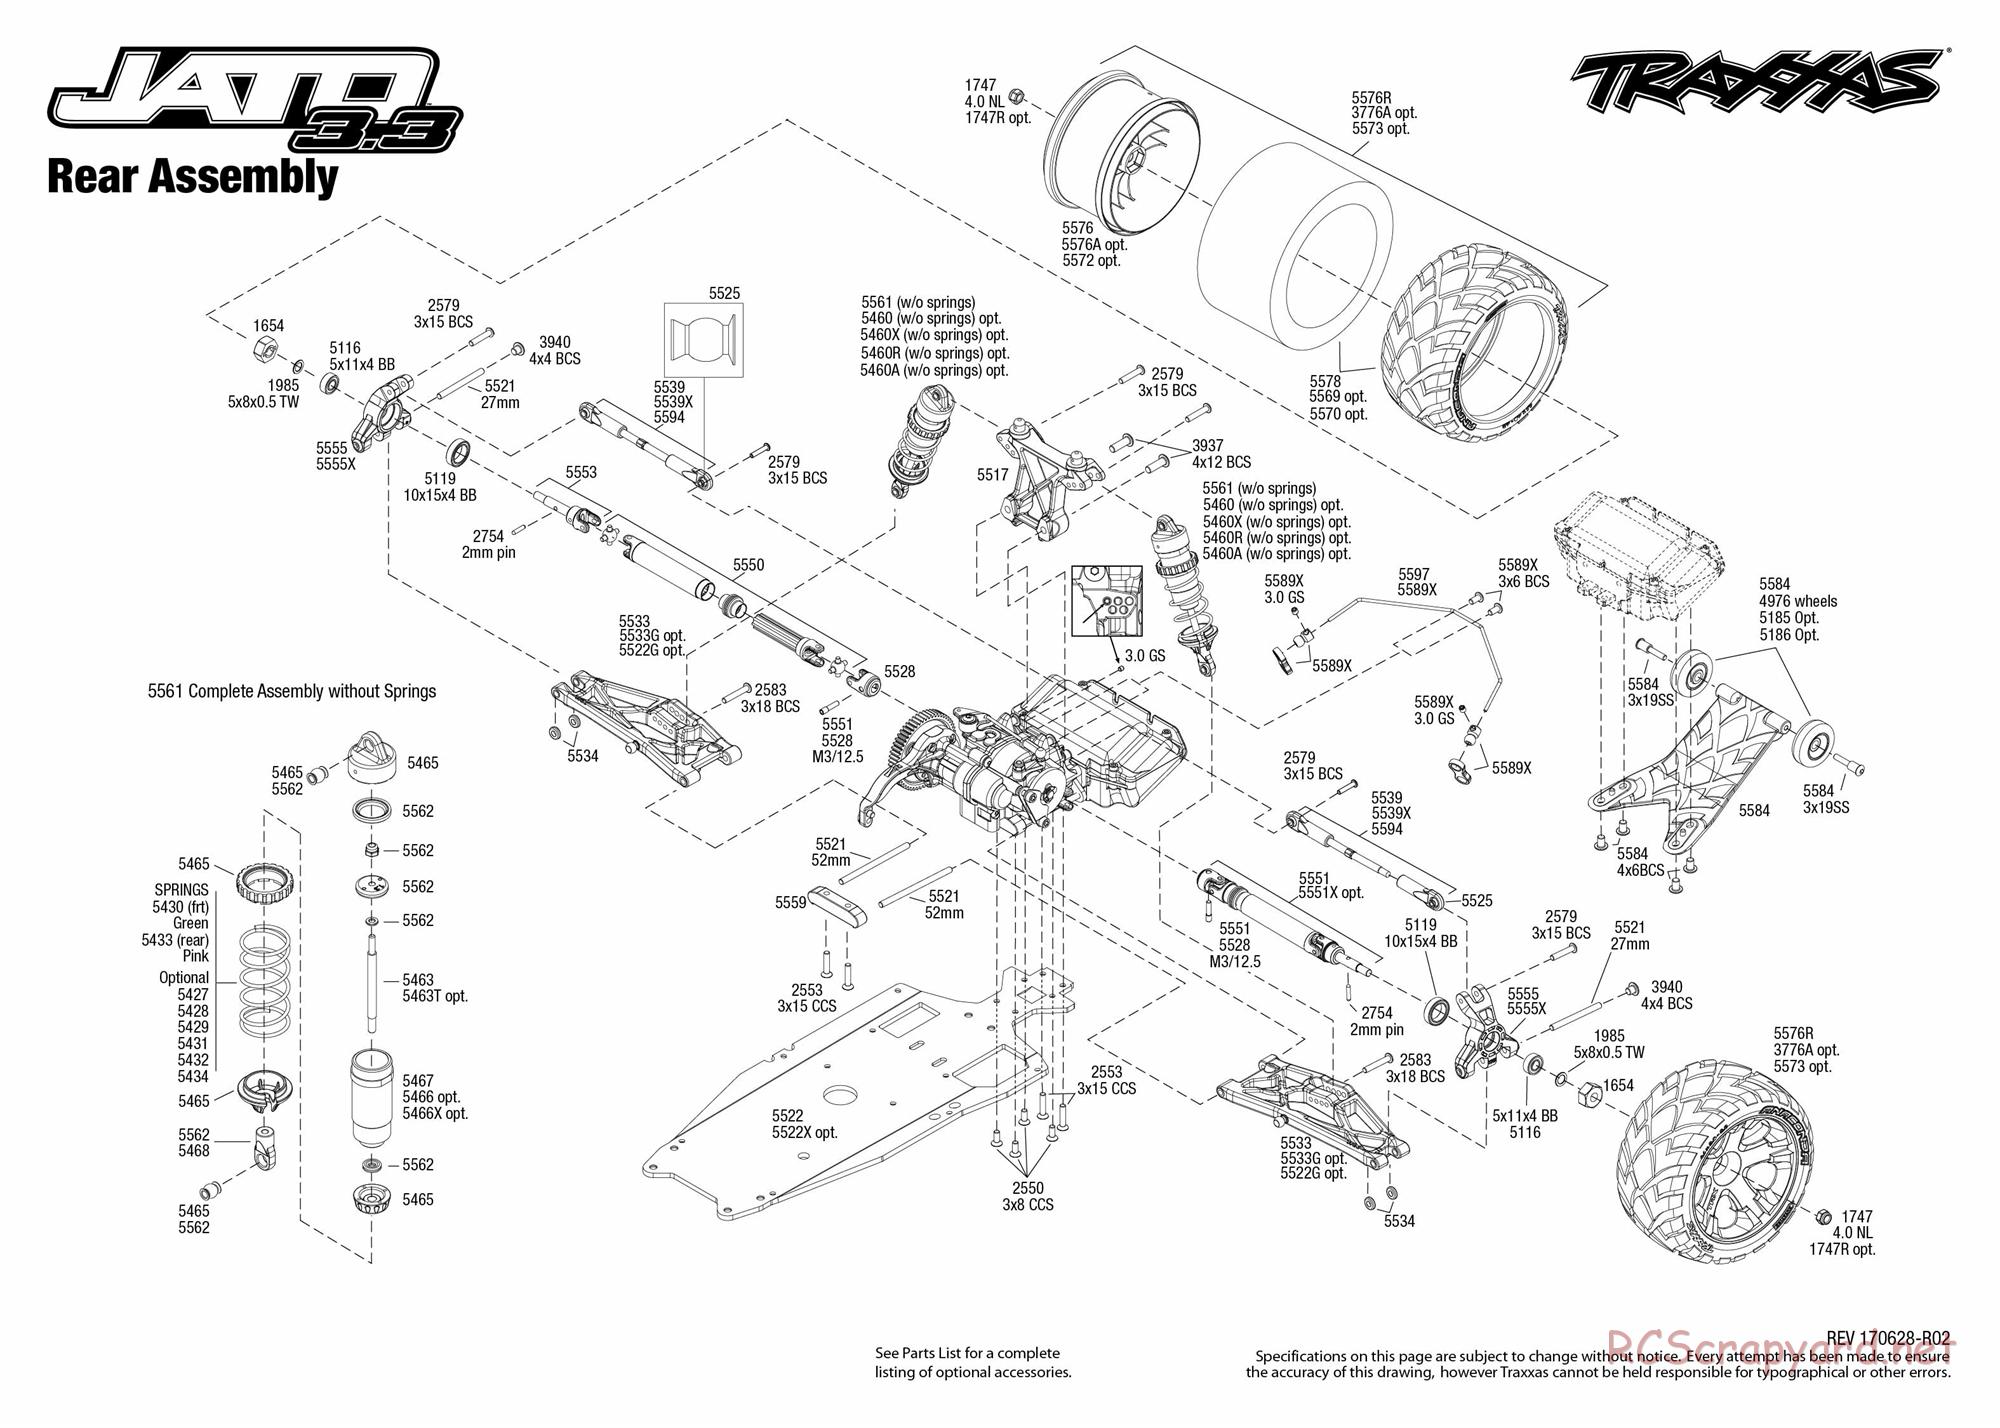 Traxxas - Jato 3.3 (2015) - Exploded Views - Page 4